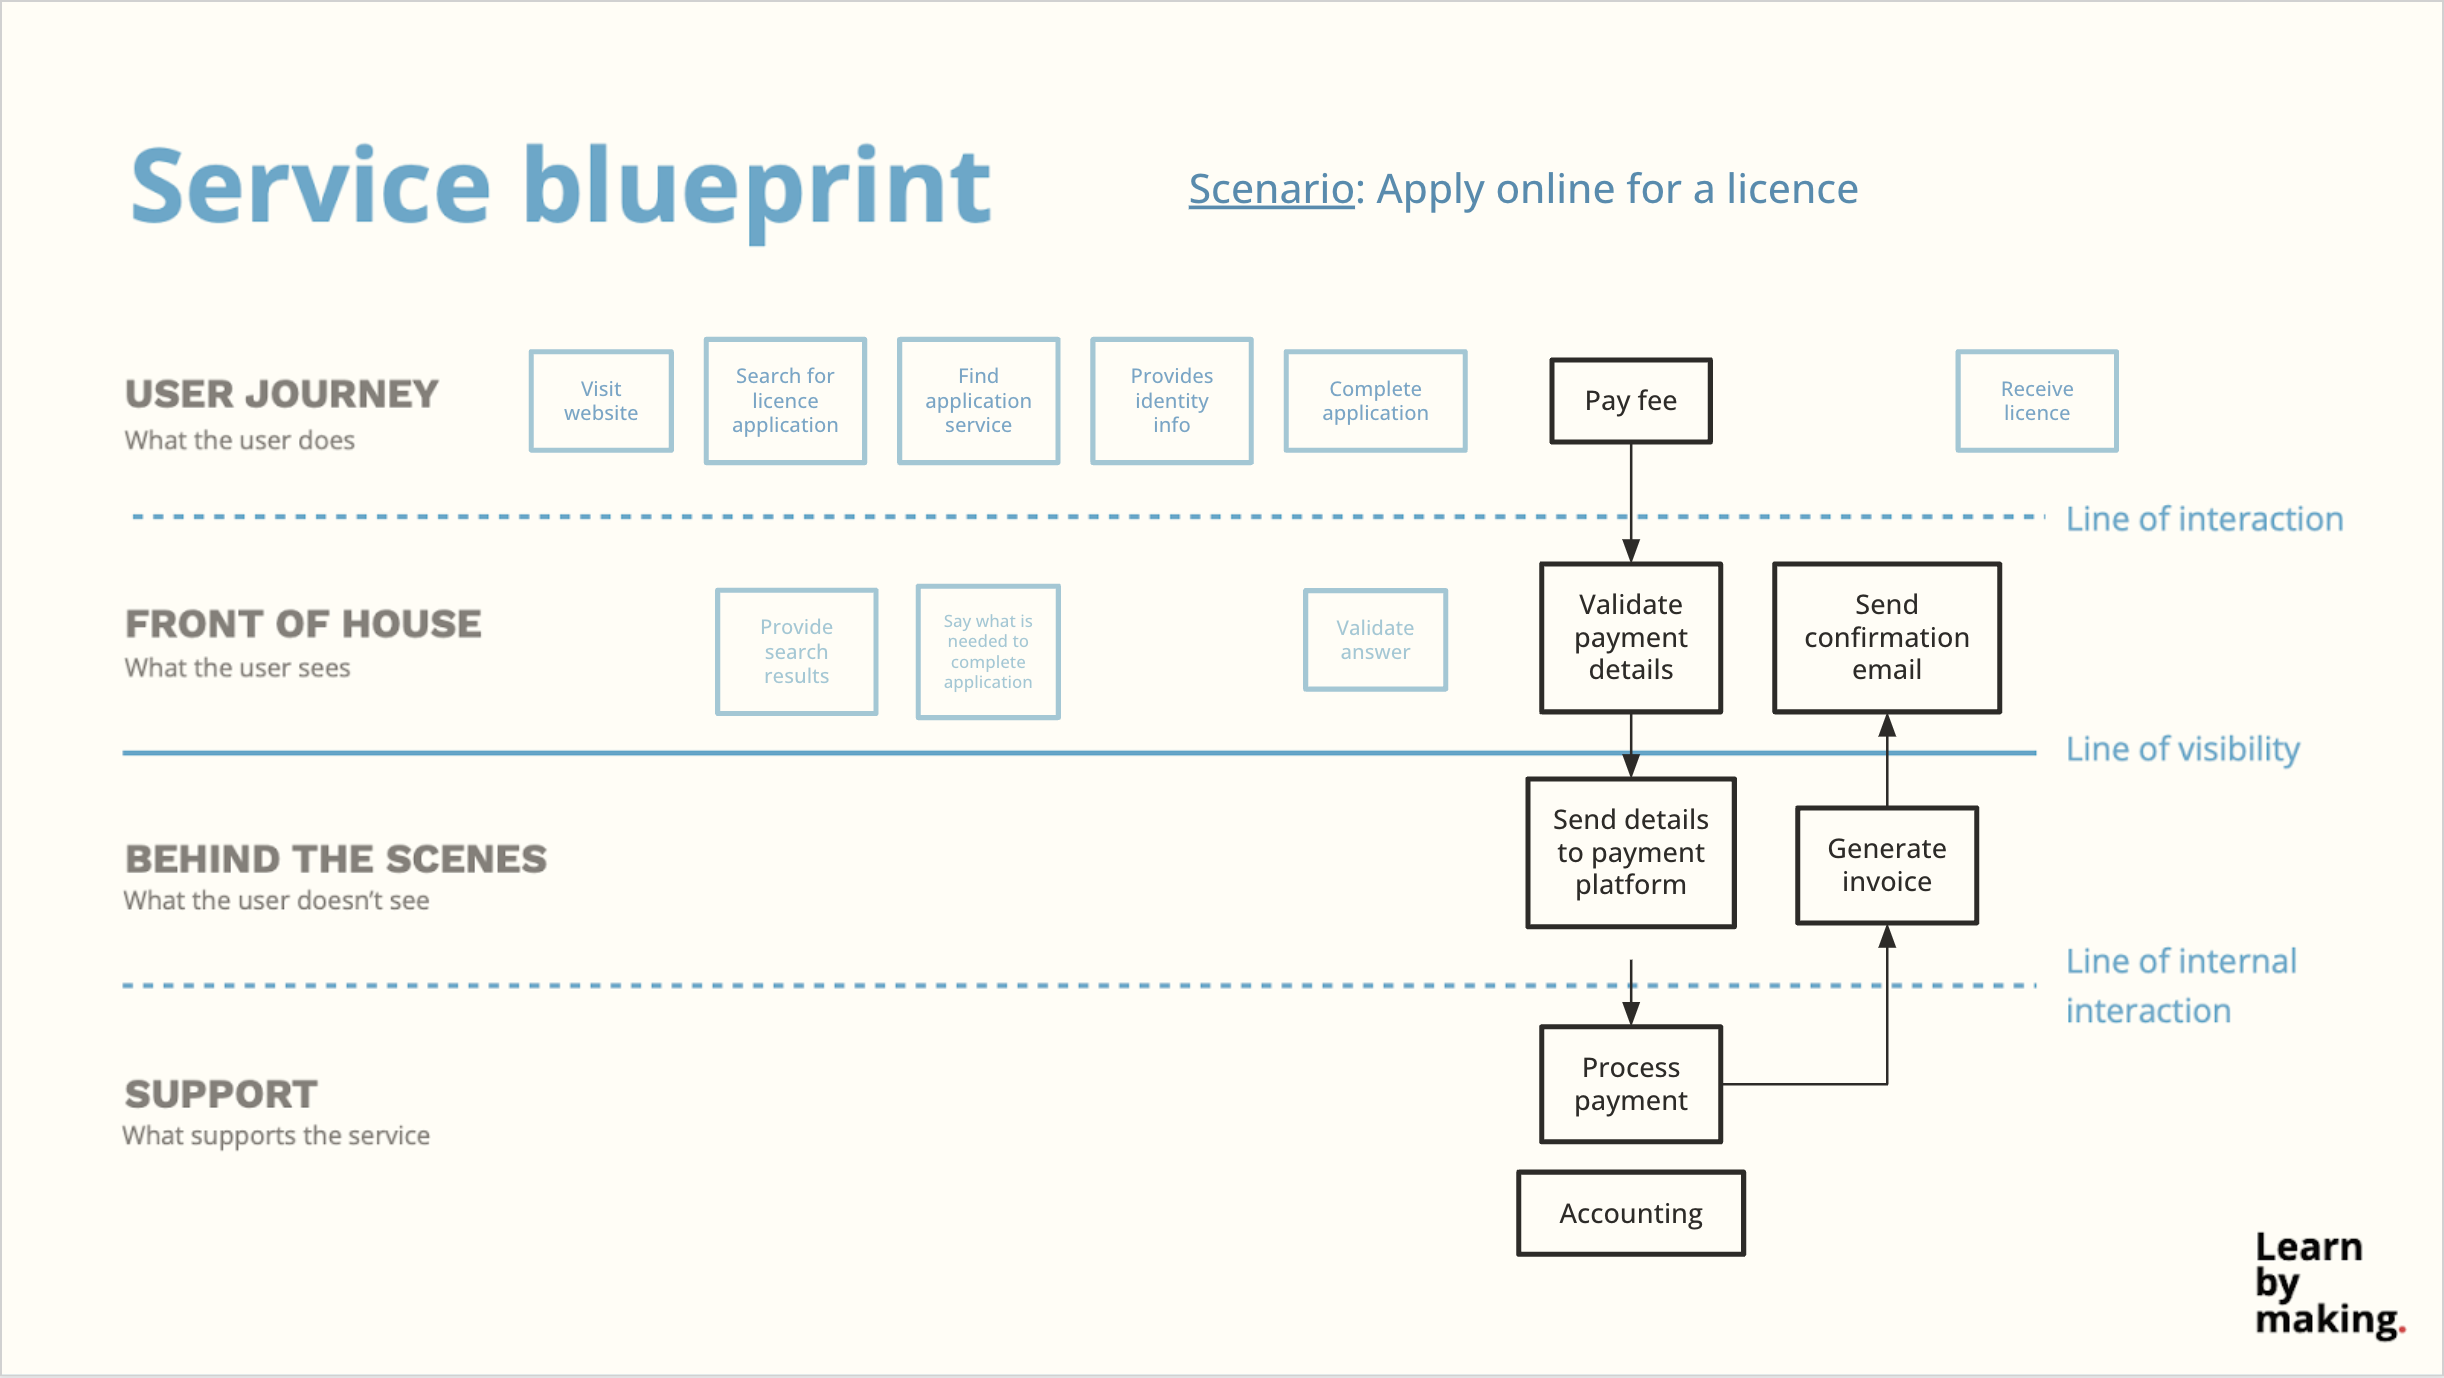 The same service blueprint example with an exploration of what happens across the 4 sections when a user “pays fee”. “Pay fee” leads to “validate payment details” in front of house. This leads to “send details to payment provider” which is behind the scenes. This leads to “process payment” in the Support section. This leads to “generate invoice” back in behind the scenes. And this leads to “send confirmation email”, an action in front of house. A box with “Accounting” is also in the support section.